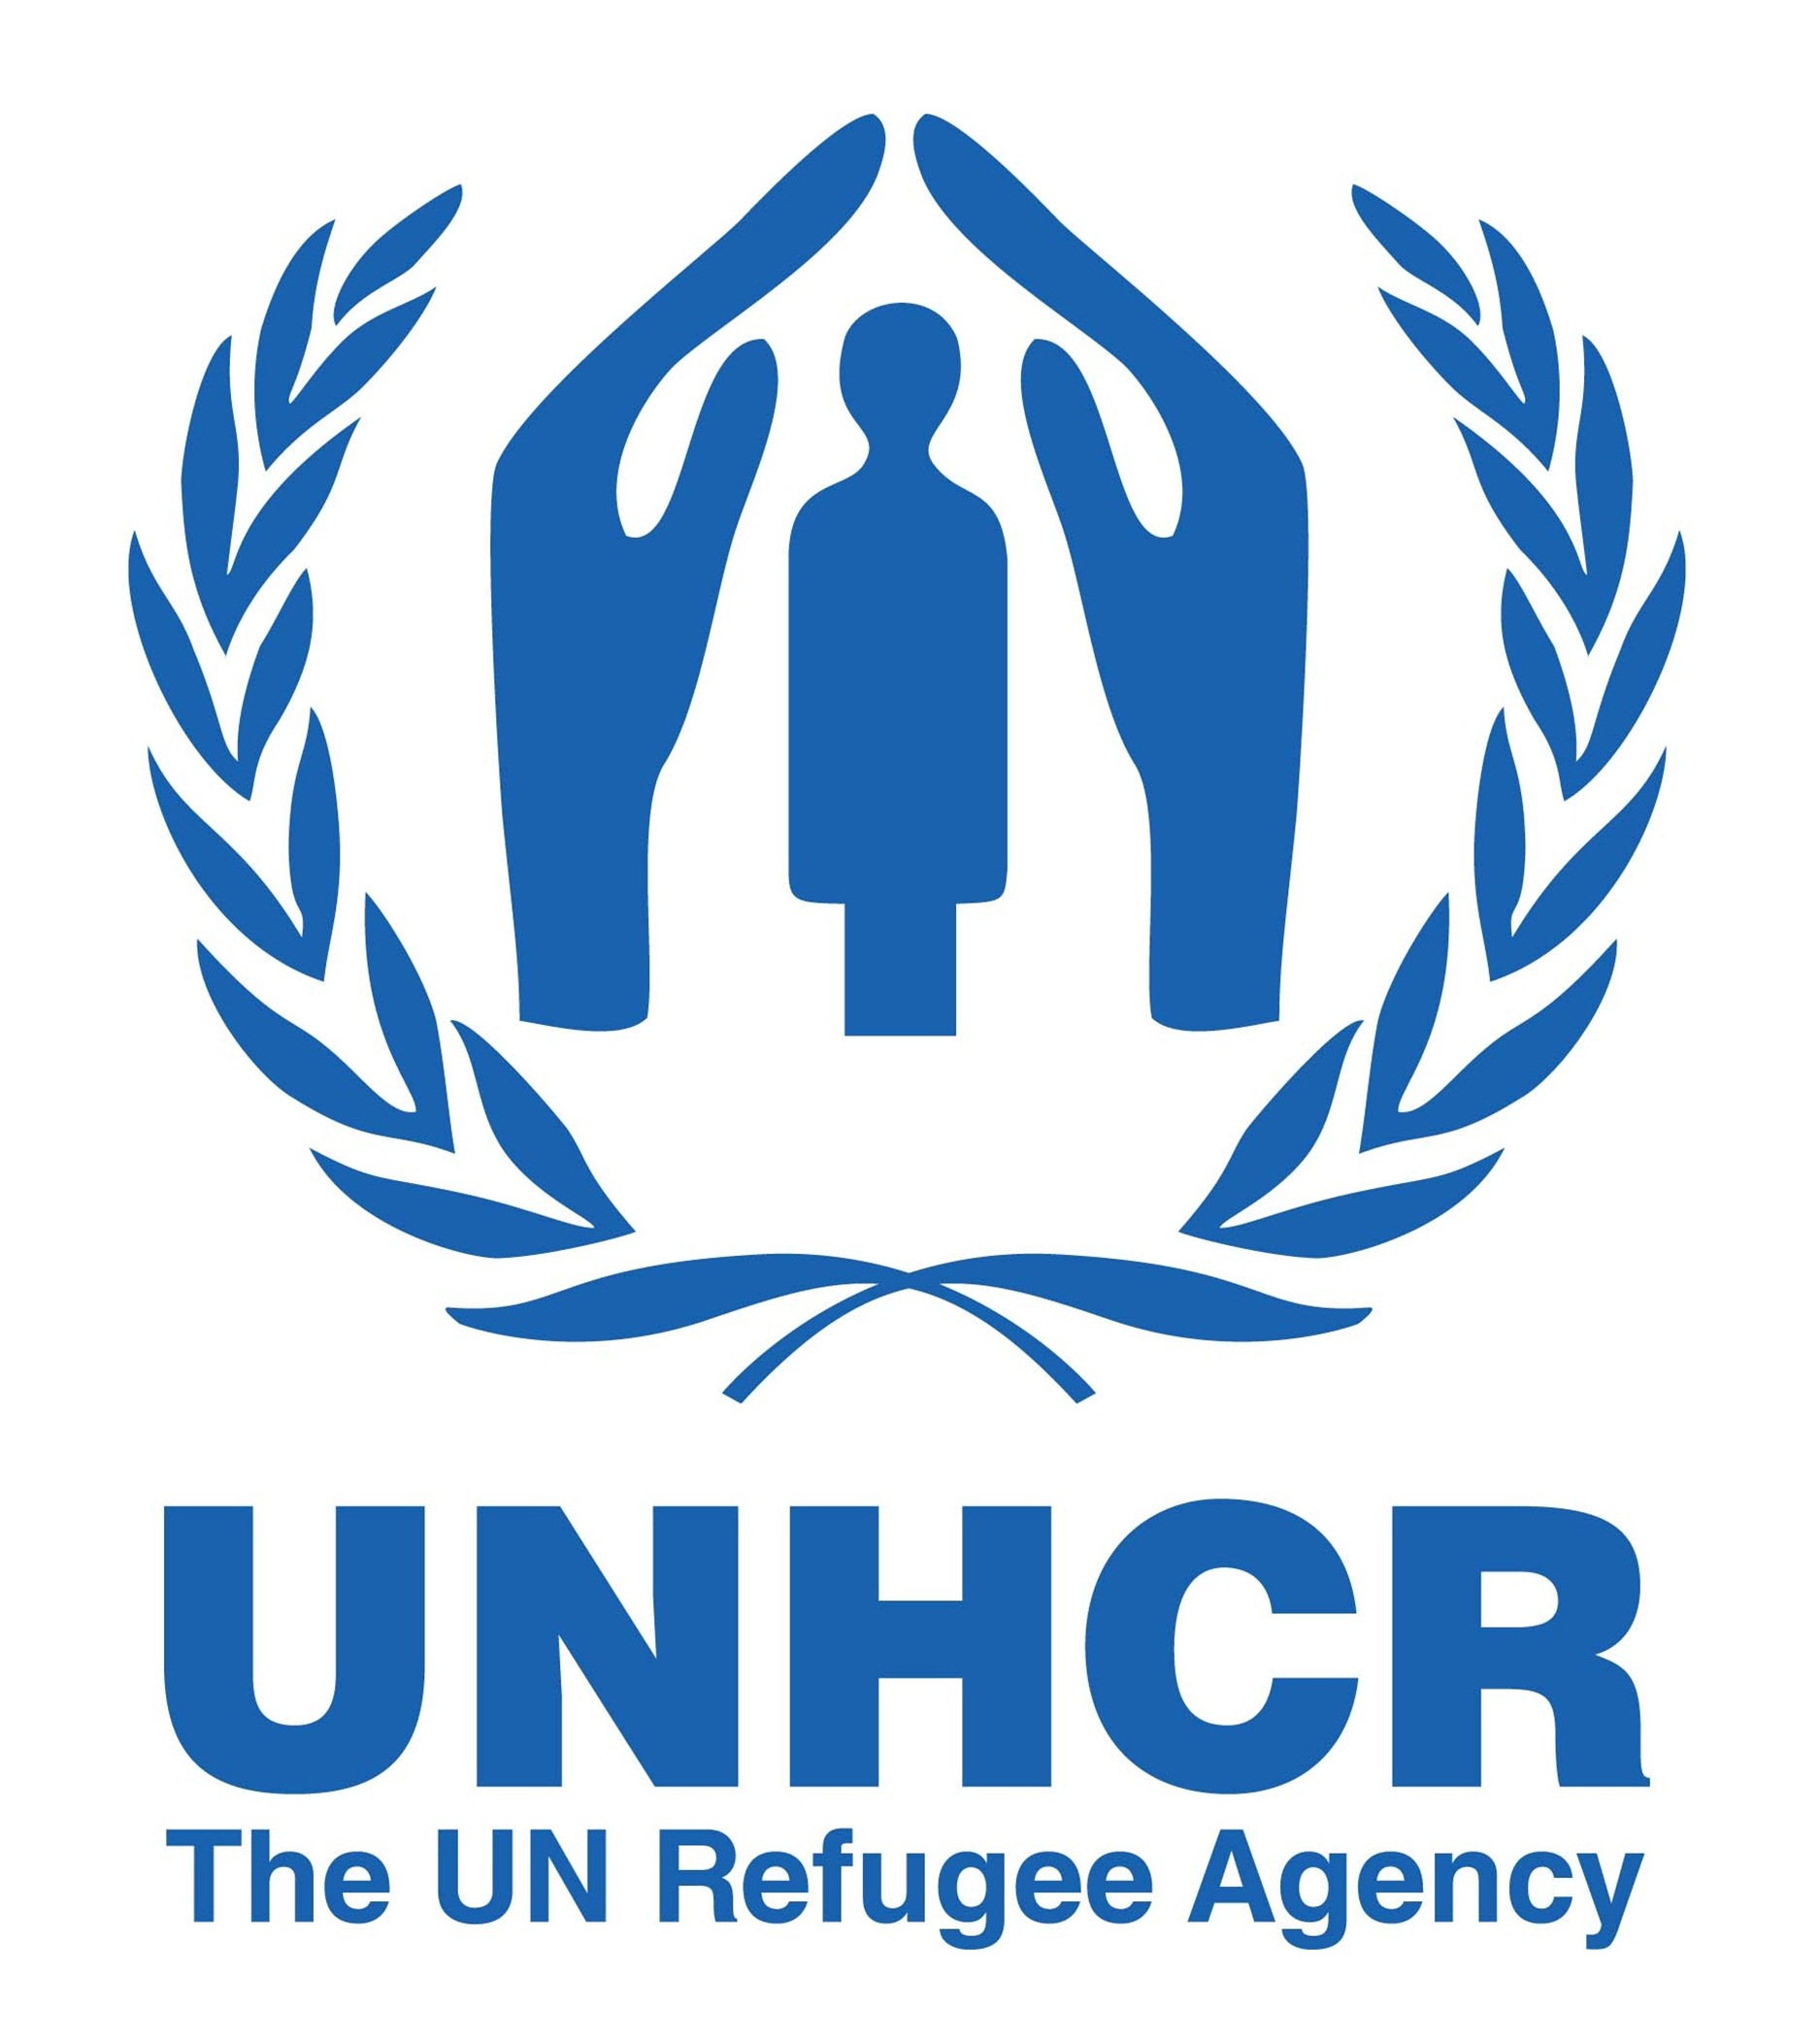 UNHCR urges states to protect refugees’ rights, not to instrumentalize their plight